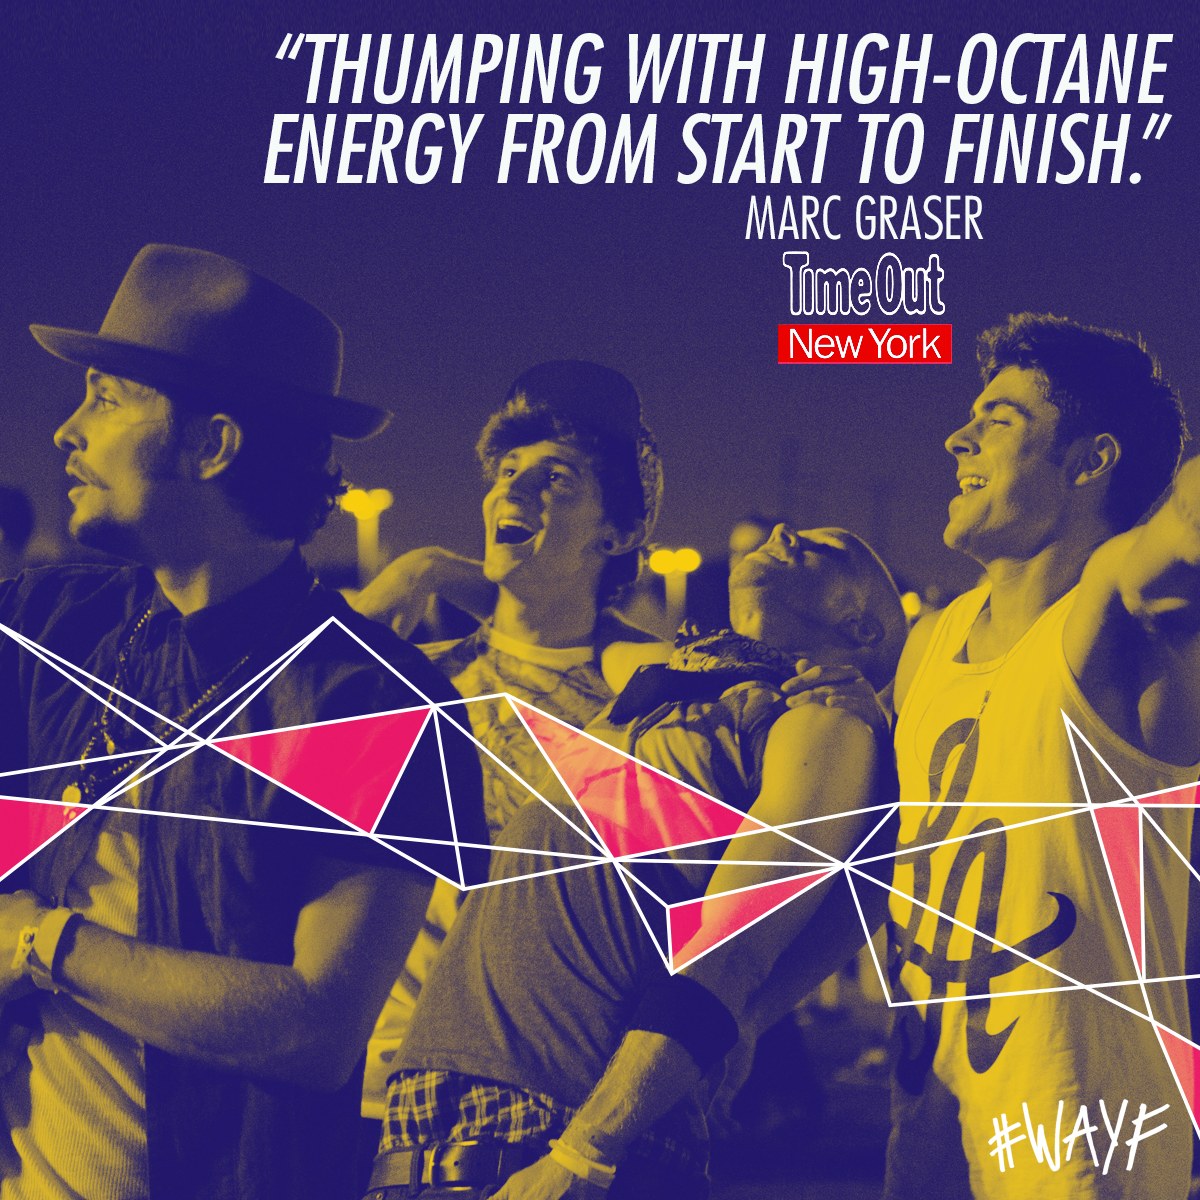 Turn. It. Up. Get your tix to see #WAYF today: http://bit.ly/wayftix